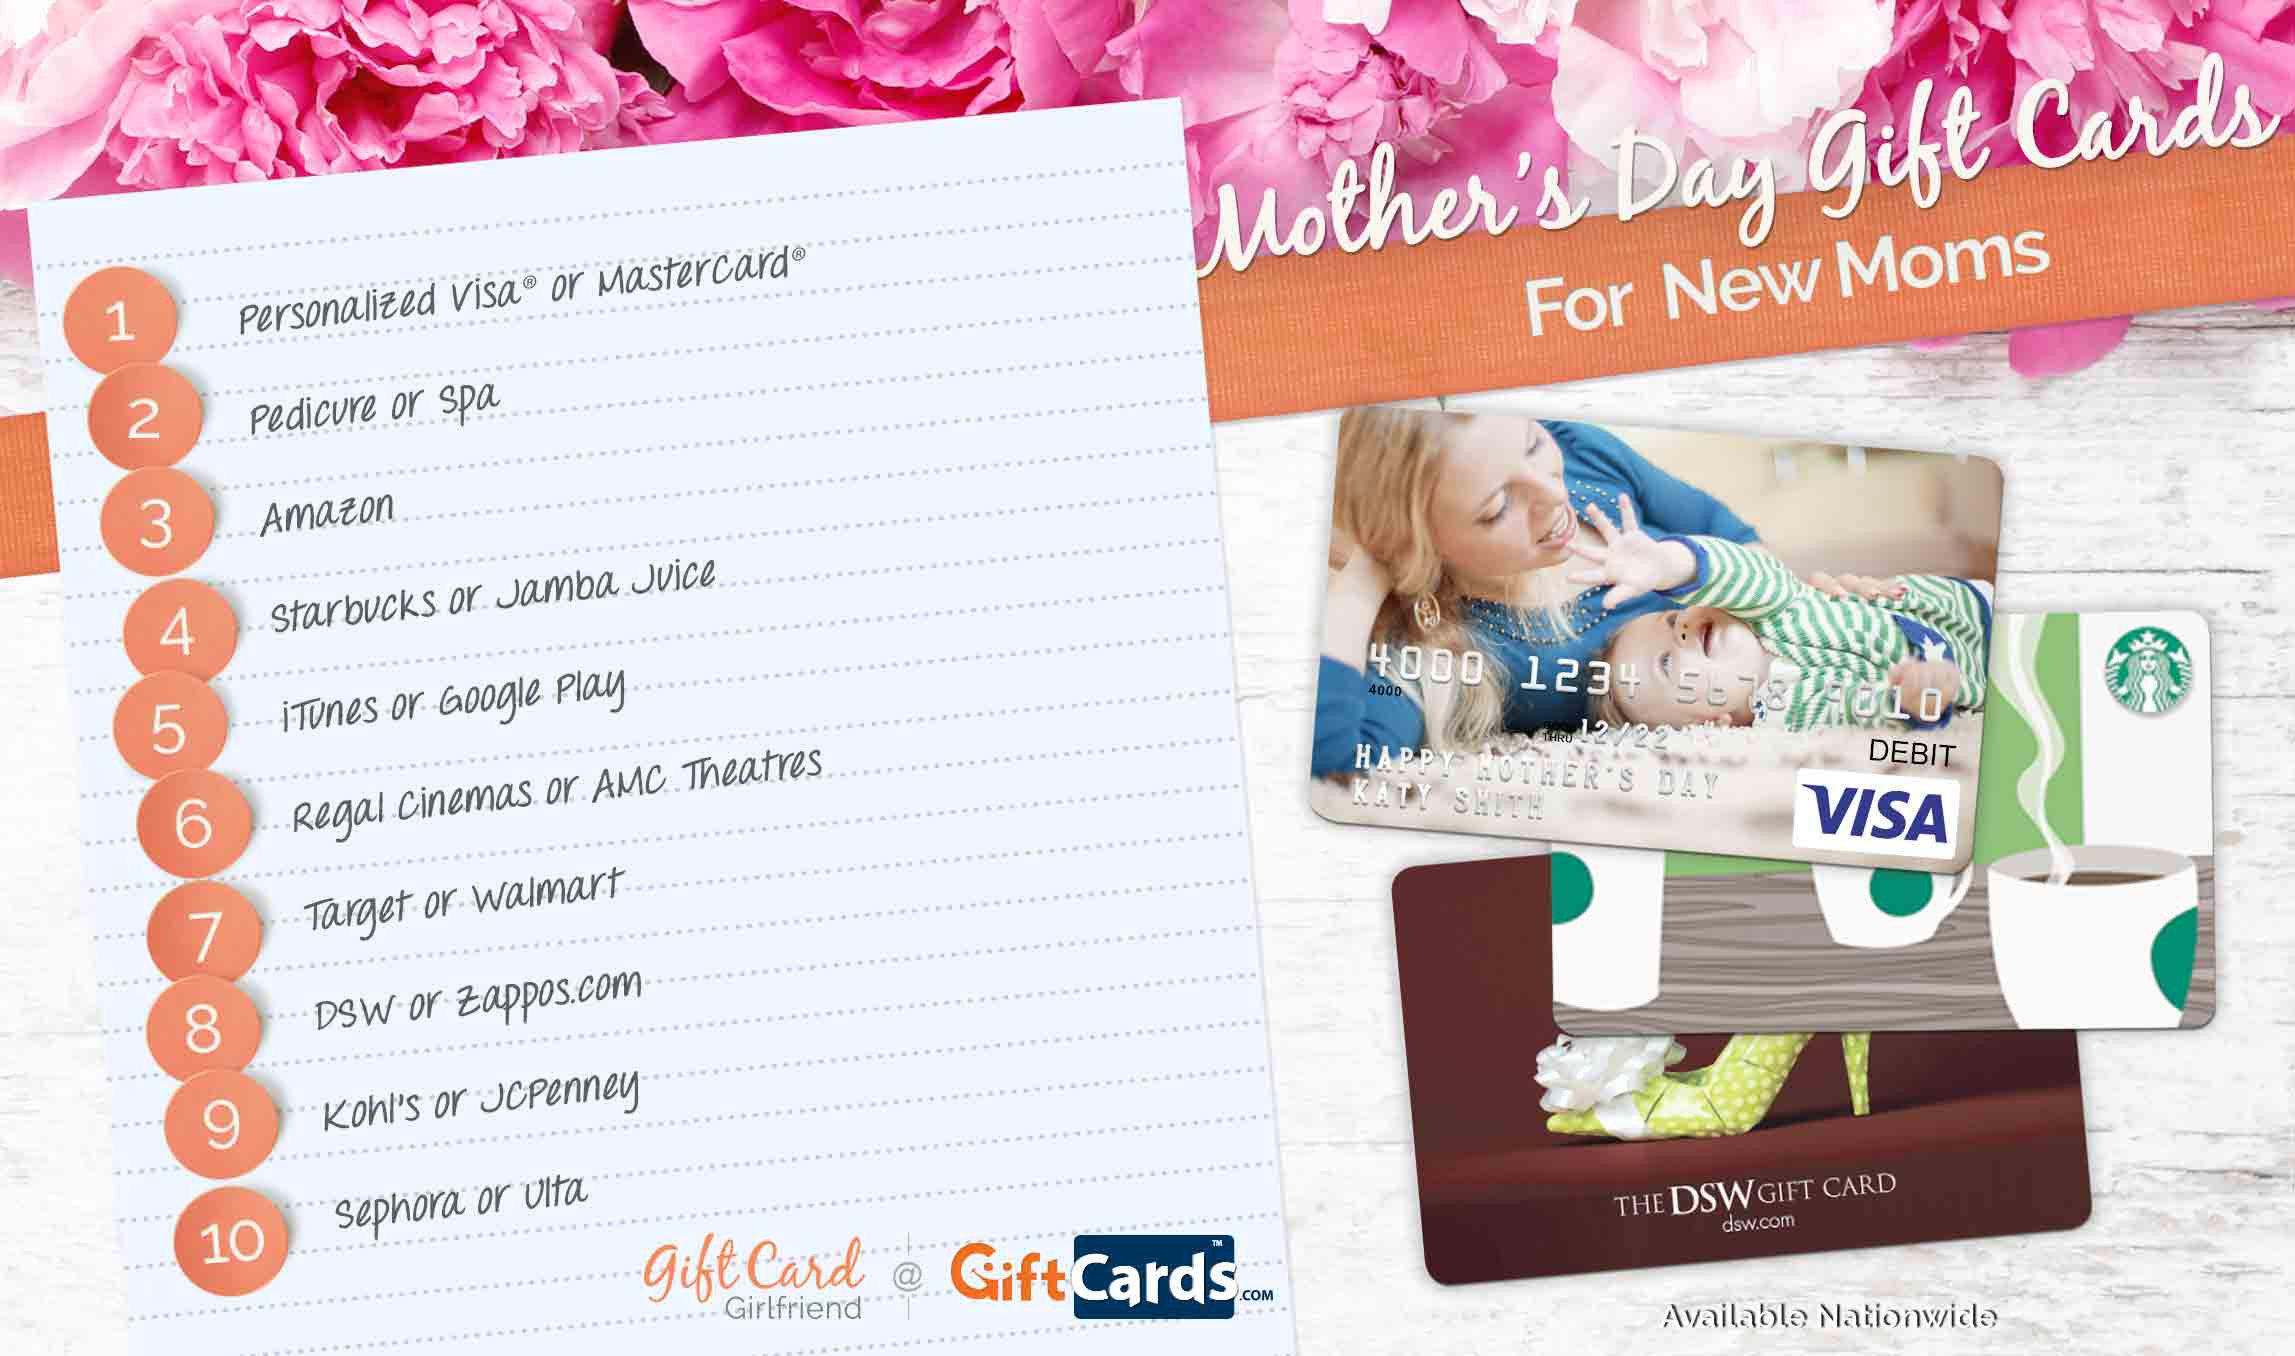 Best Mothers Day Gifts For New Moms
 Top 10 Mother s Day Gift Cards for New Moms